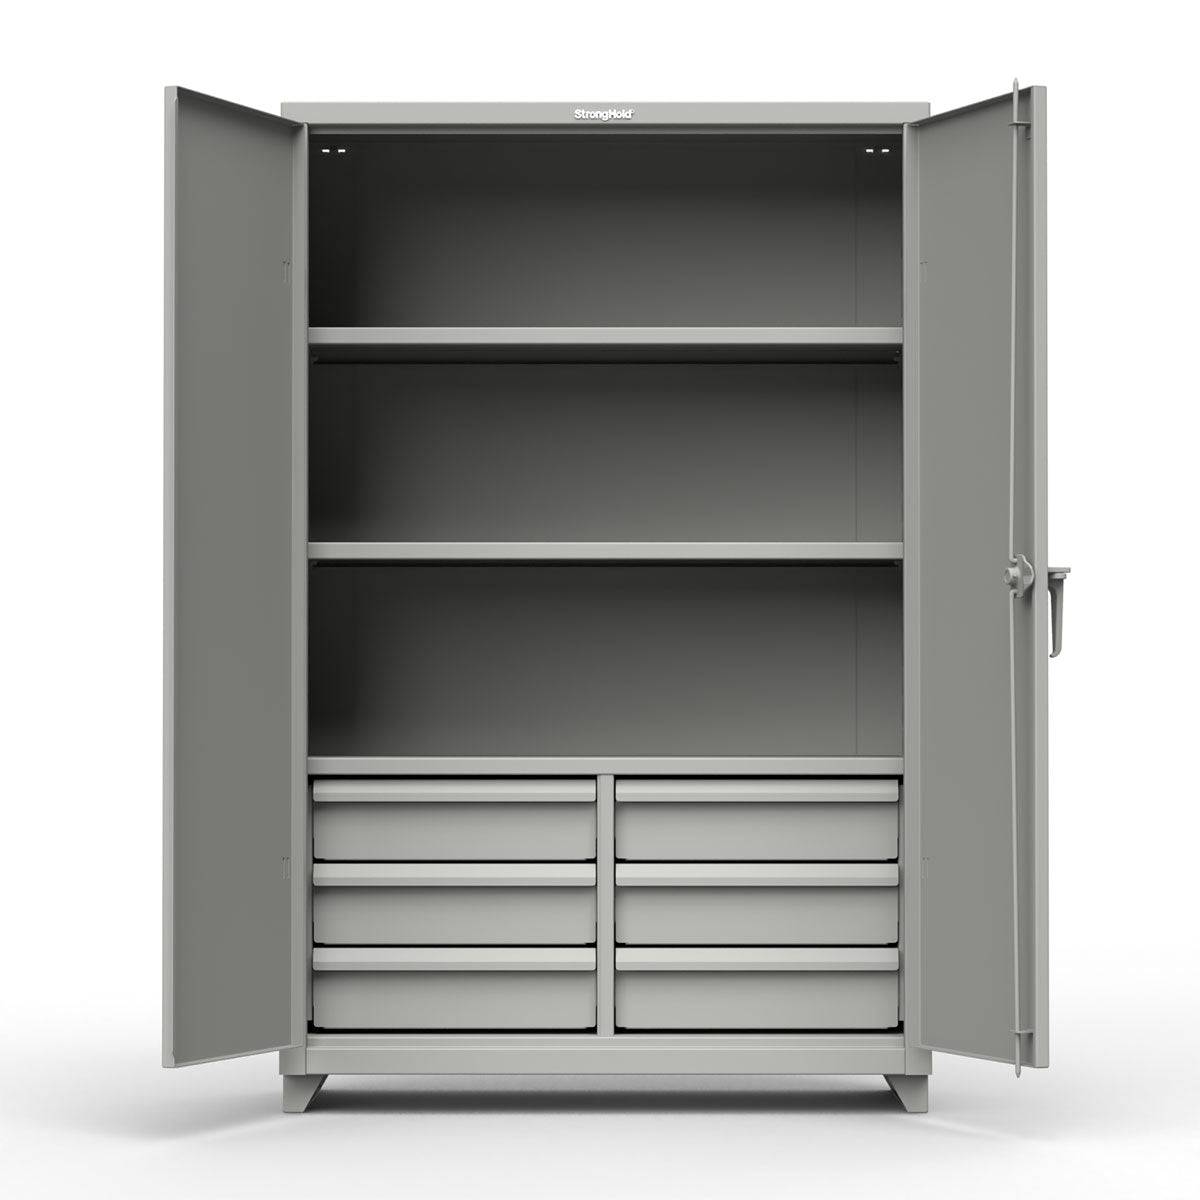 Extra Heavy Duty 14 GA Cabinet with 6 Half-Width Drawers - Strong Hold